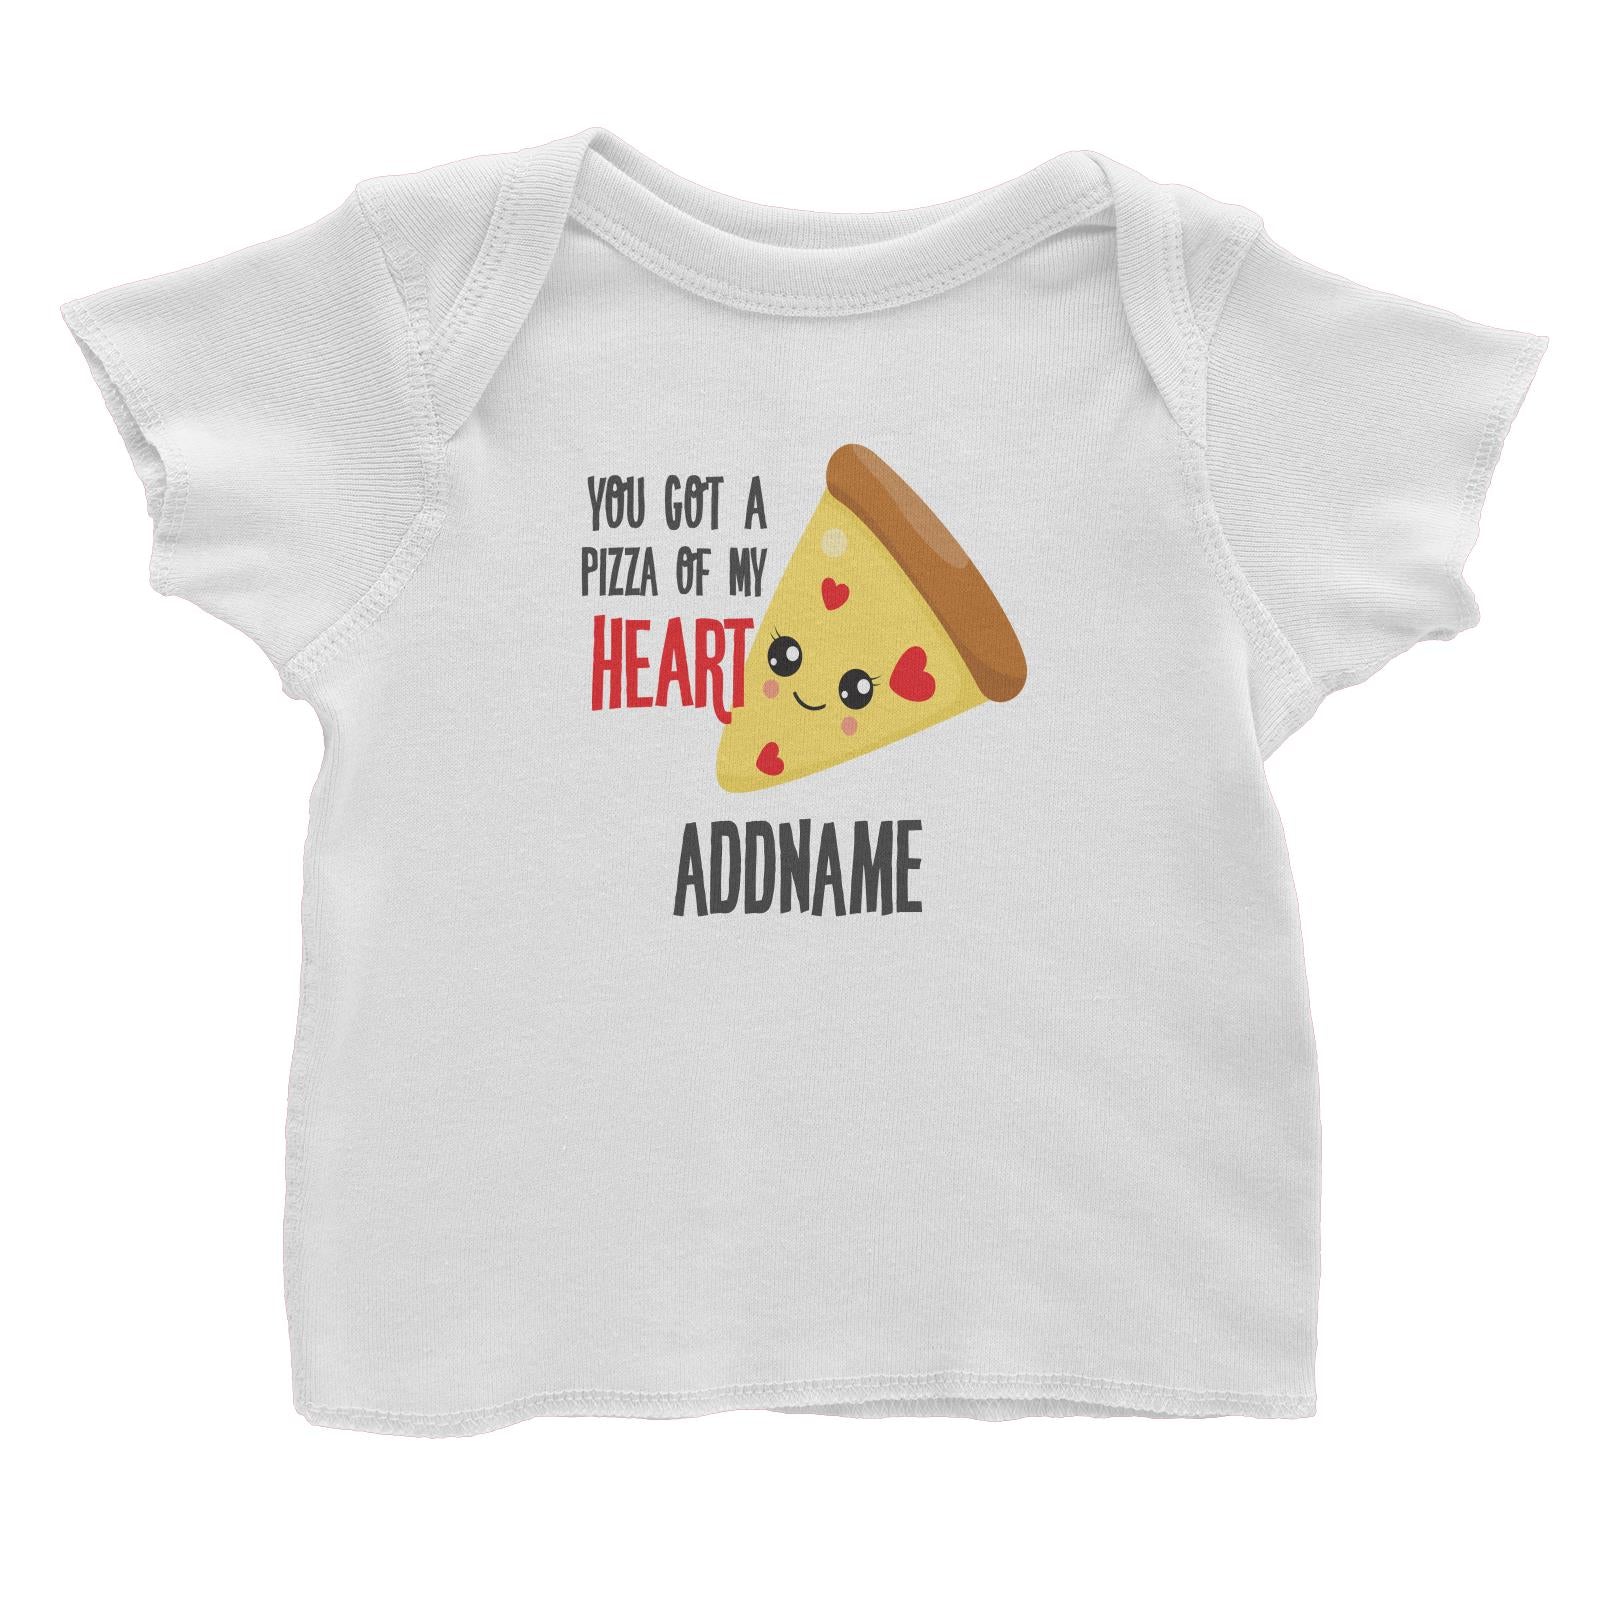 Love Food Puns You Got A Pizza Of My Heart Addname Baby T-Shirt